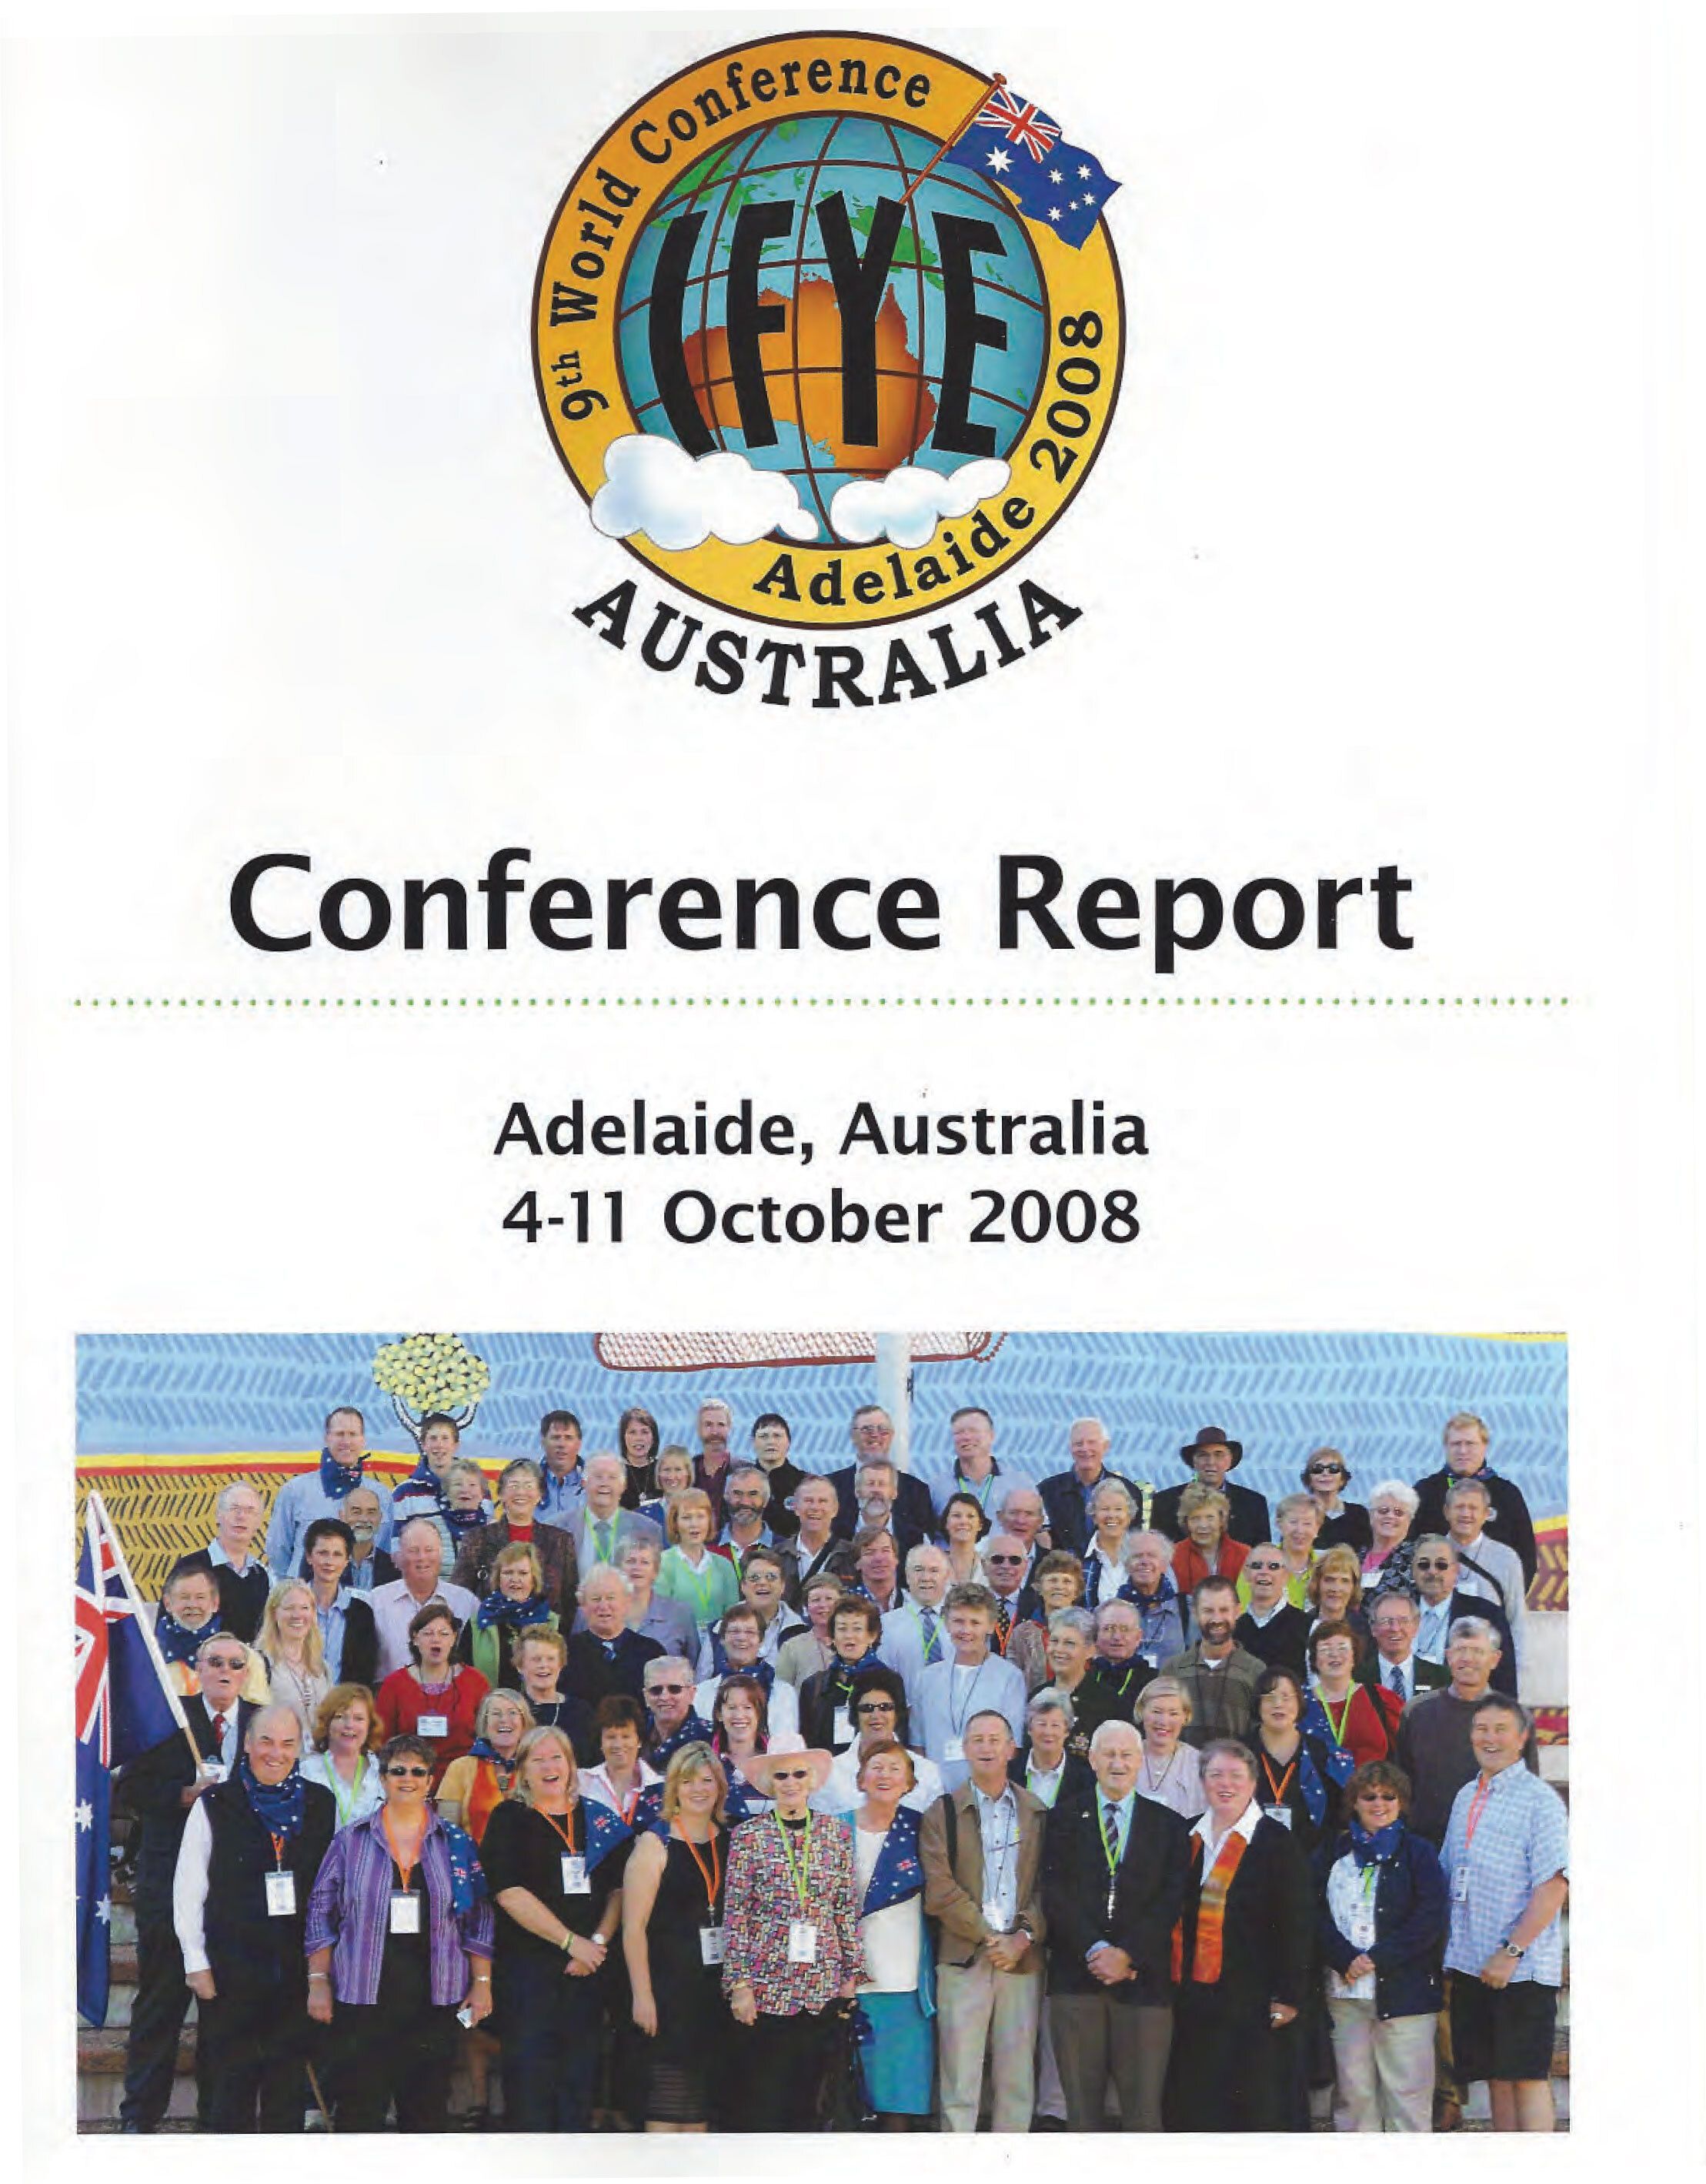 Read the 9th World Conference Report